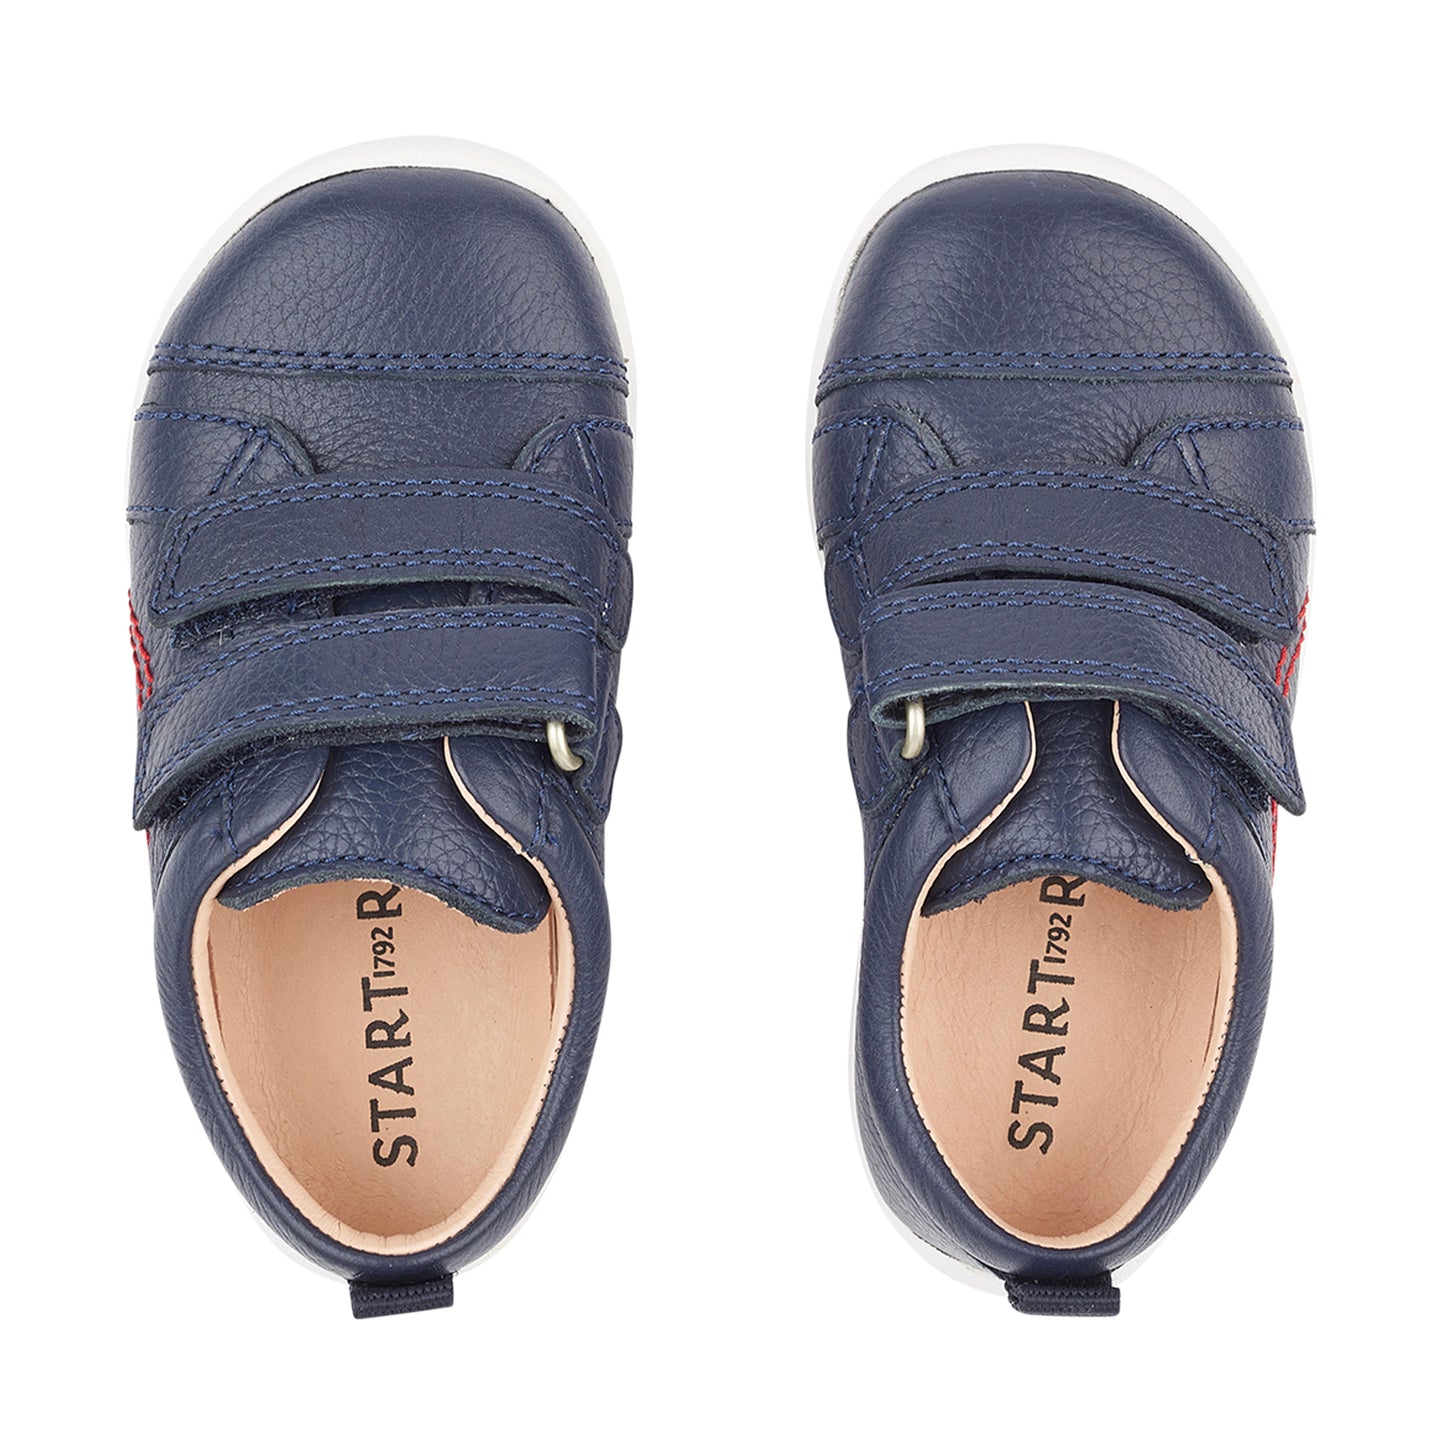 Tree House Navy Leather First Walking Shoe